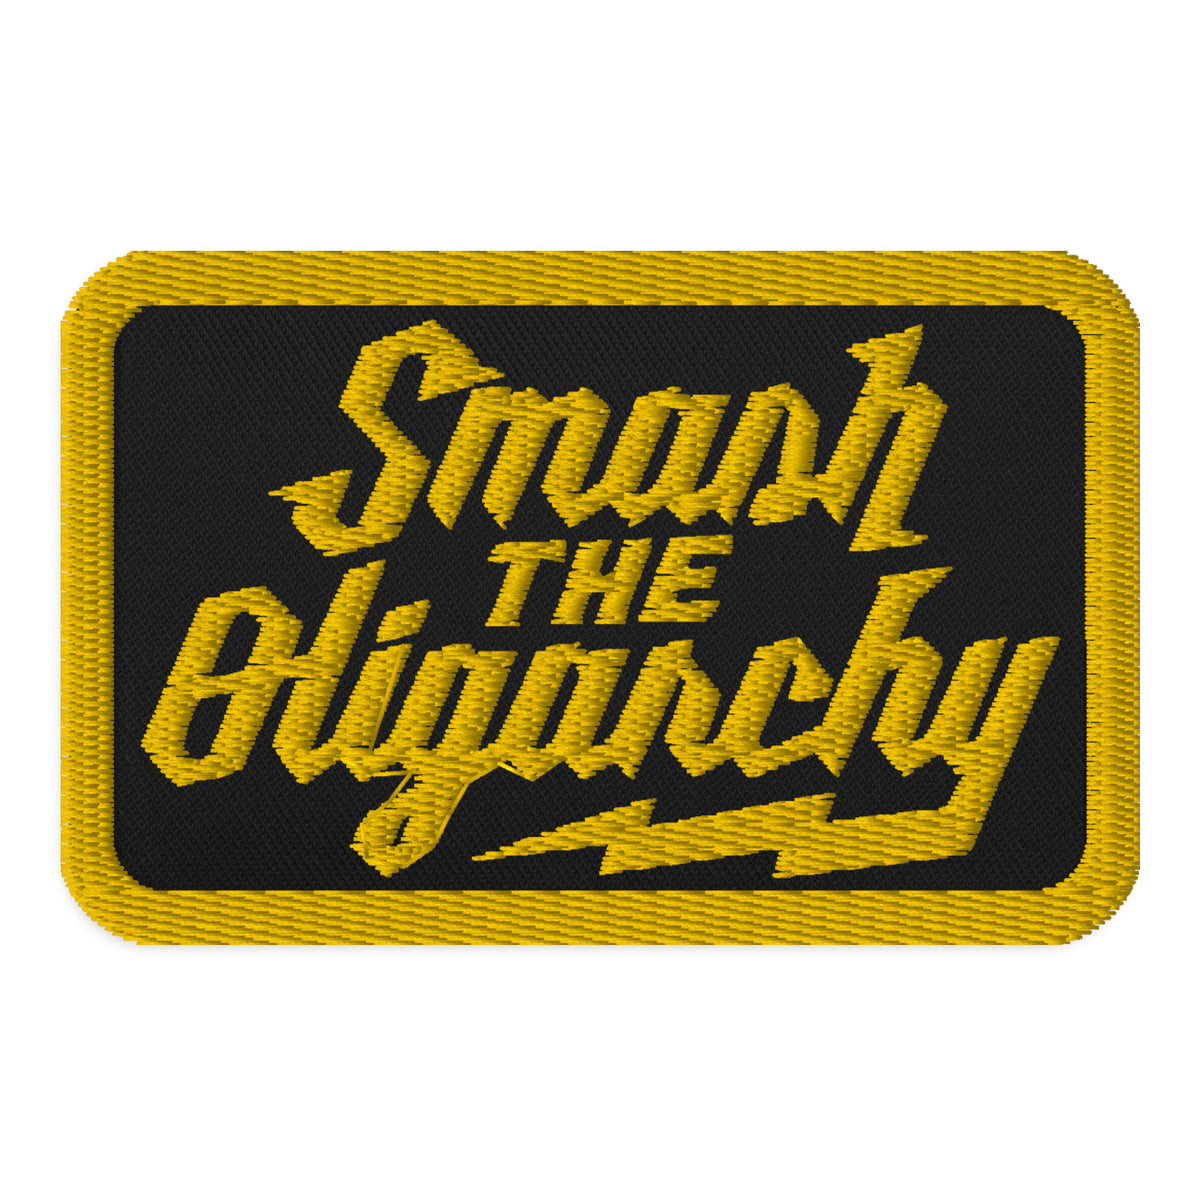 Smash the Oligarchy Embroidered Patches